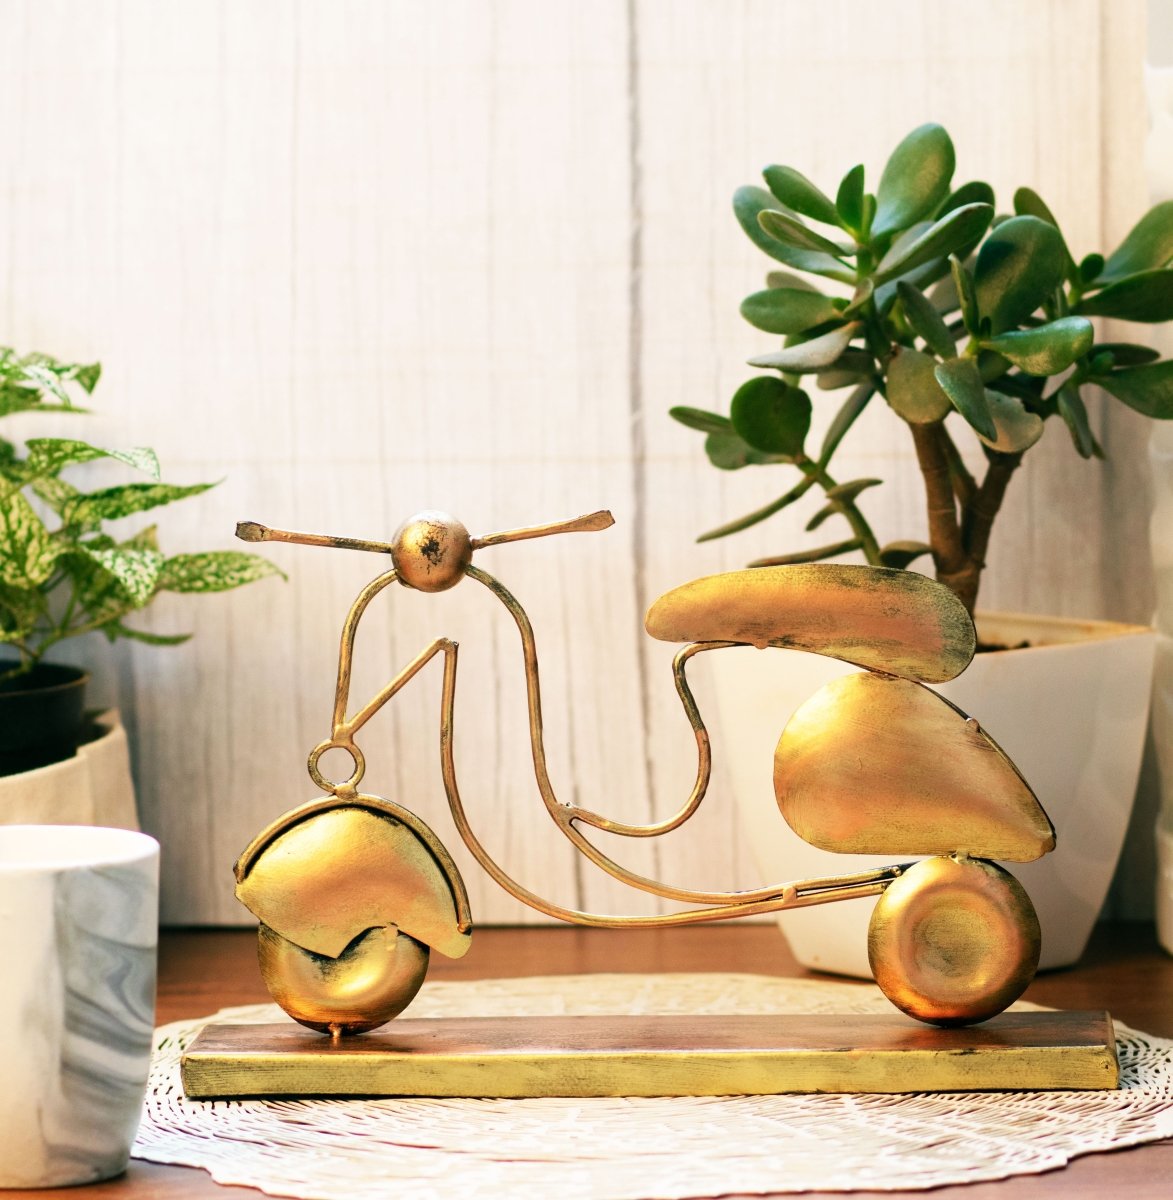 Kezevel Metal Scooter Table Decor - Artistic Scooter Figurines Statue Antique Golden Finish Metal Showpieces for Home Decor